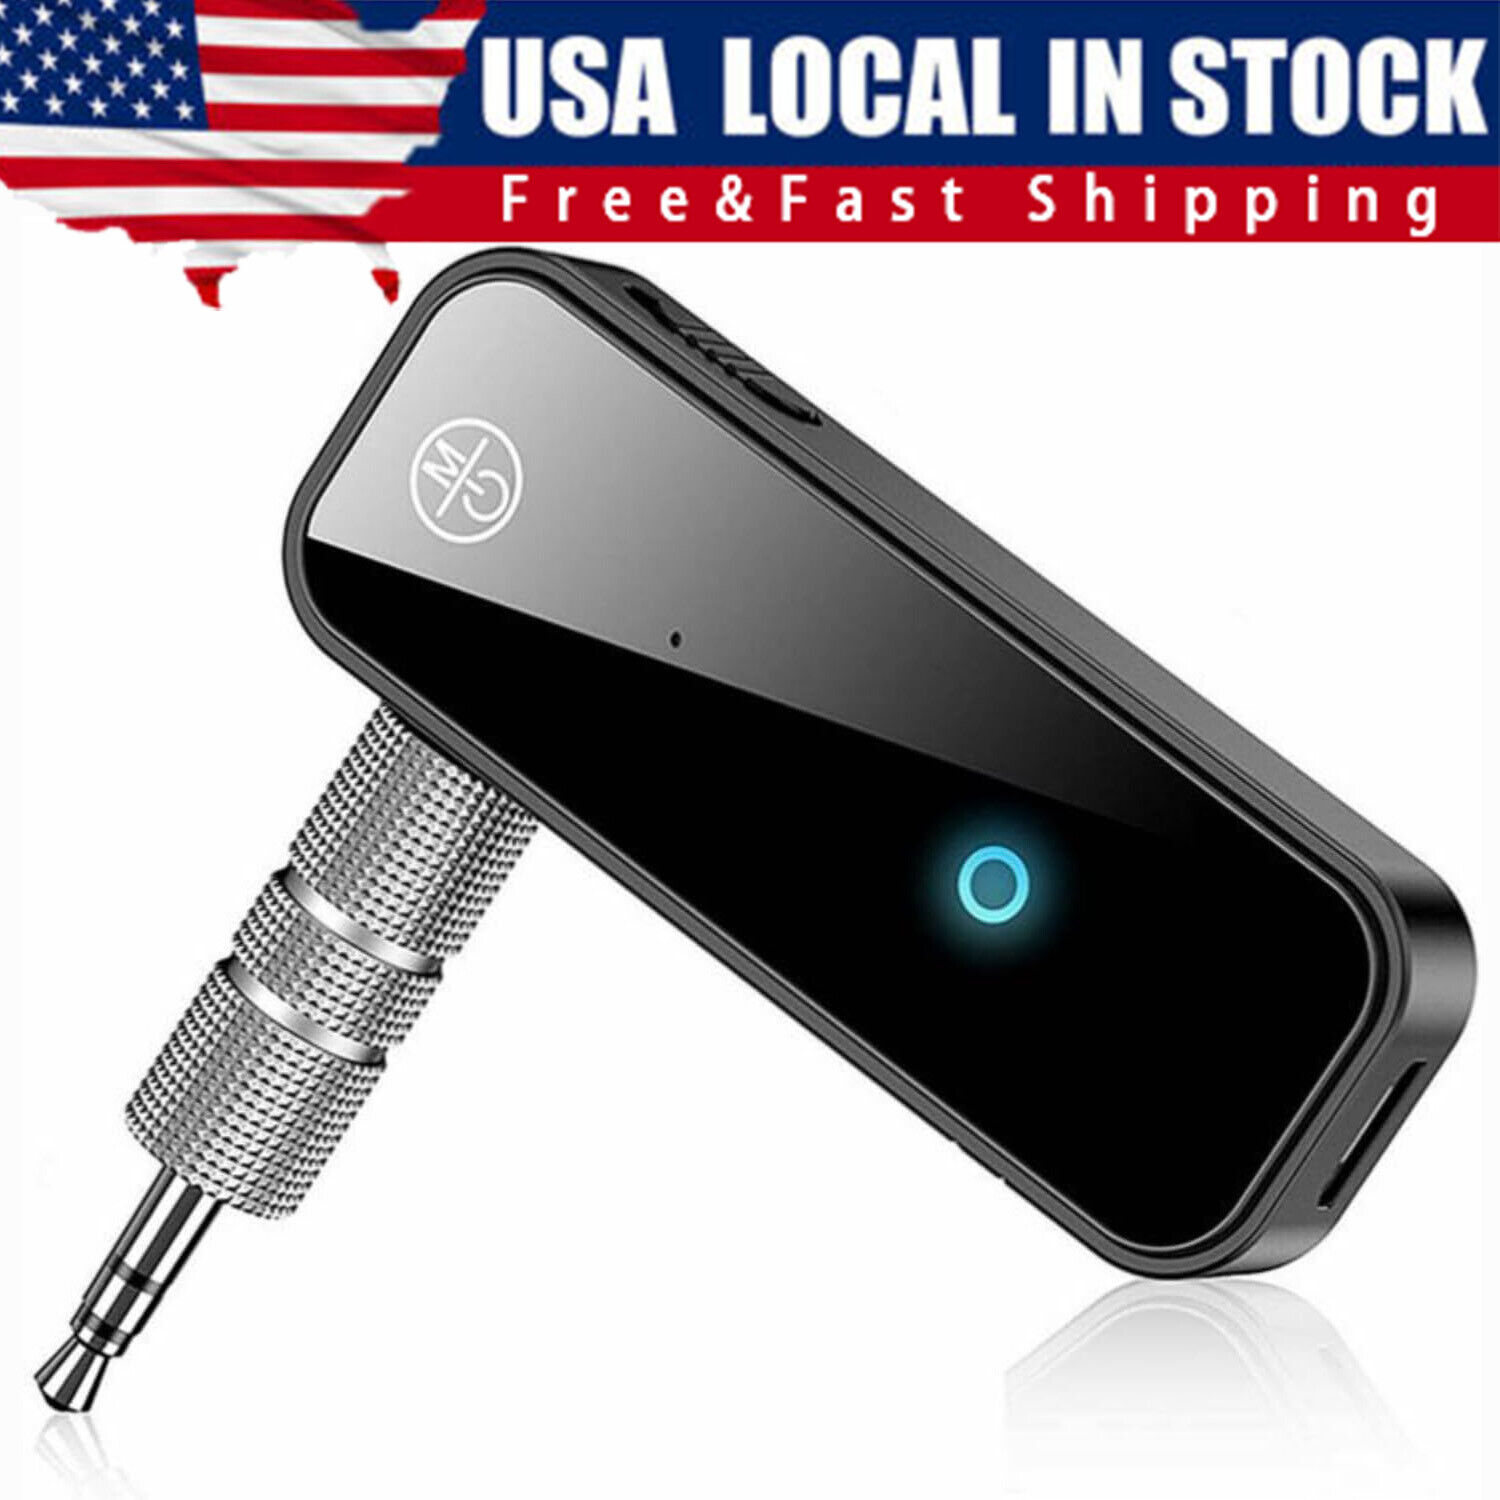 USB Wireless Bluetooth 5.0 Transmitter Receiver for Car Music Audio Aux Adapter